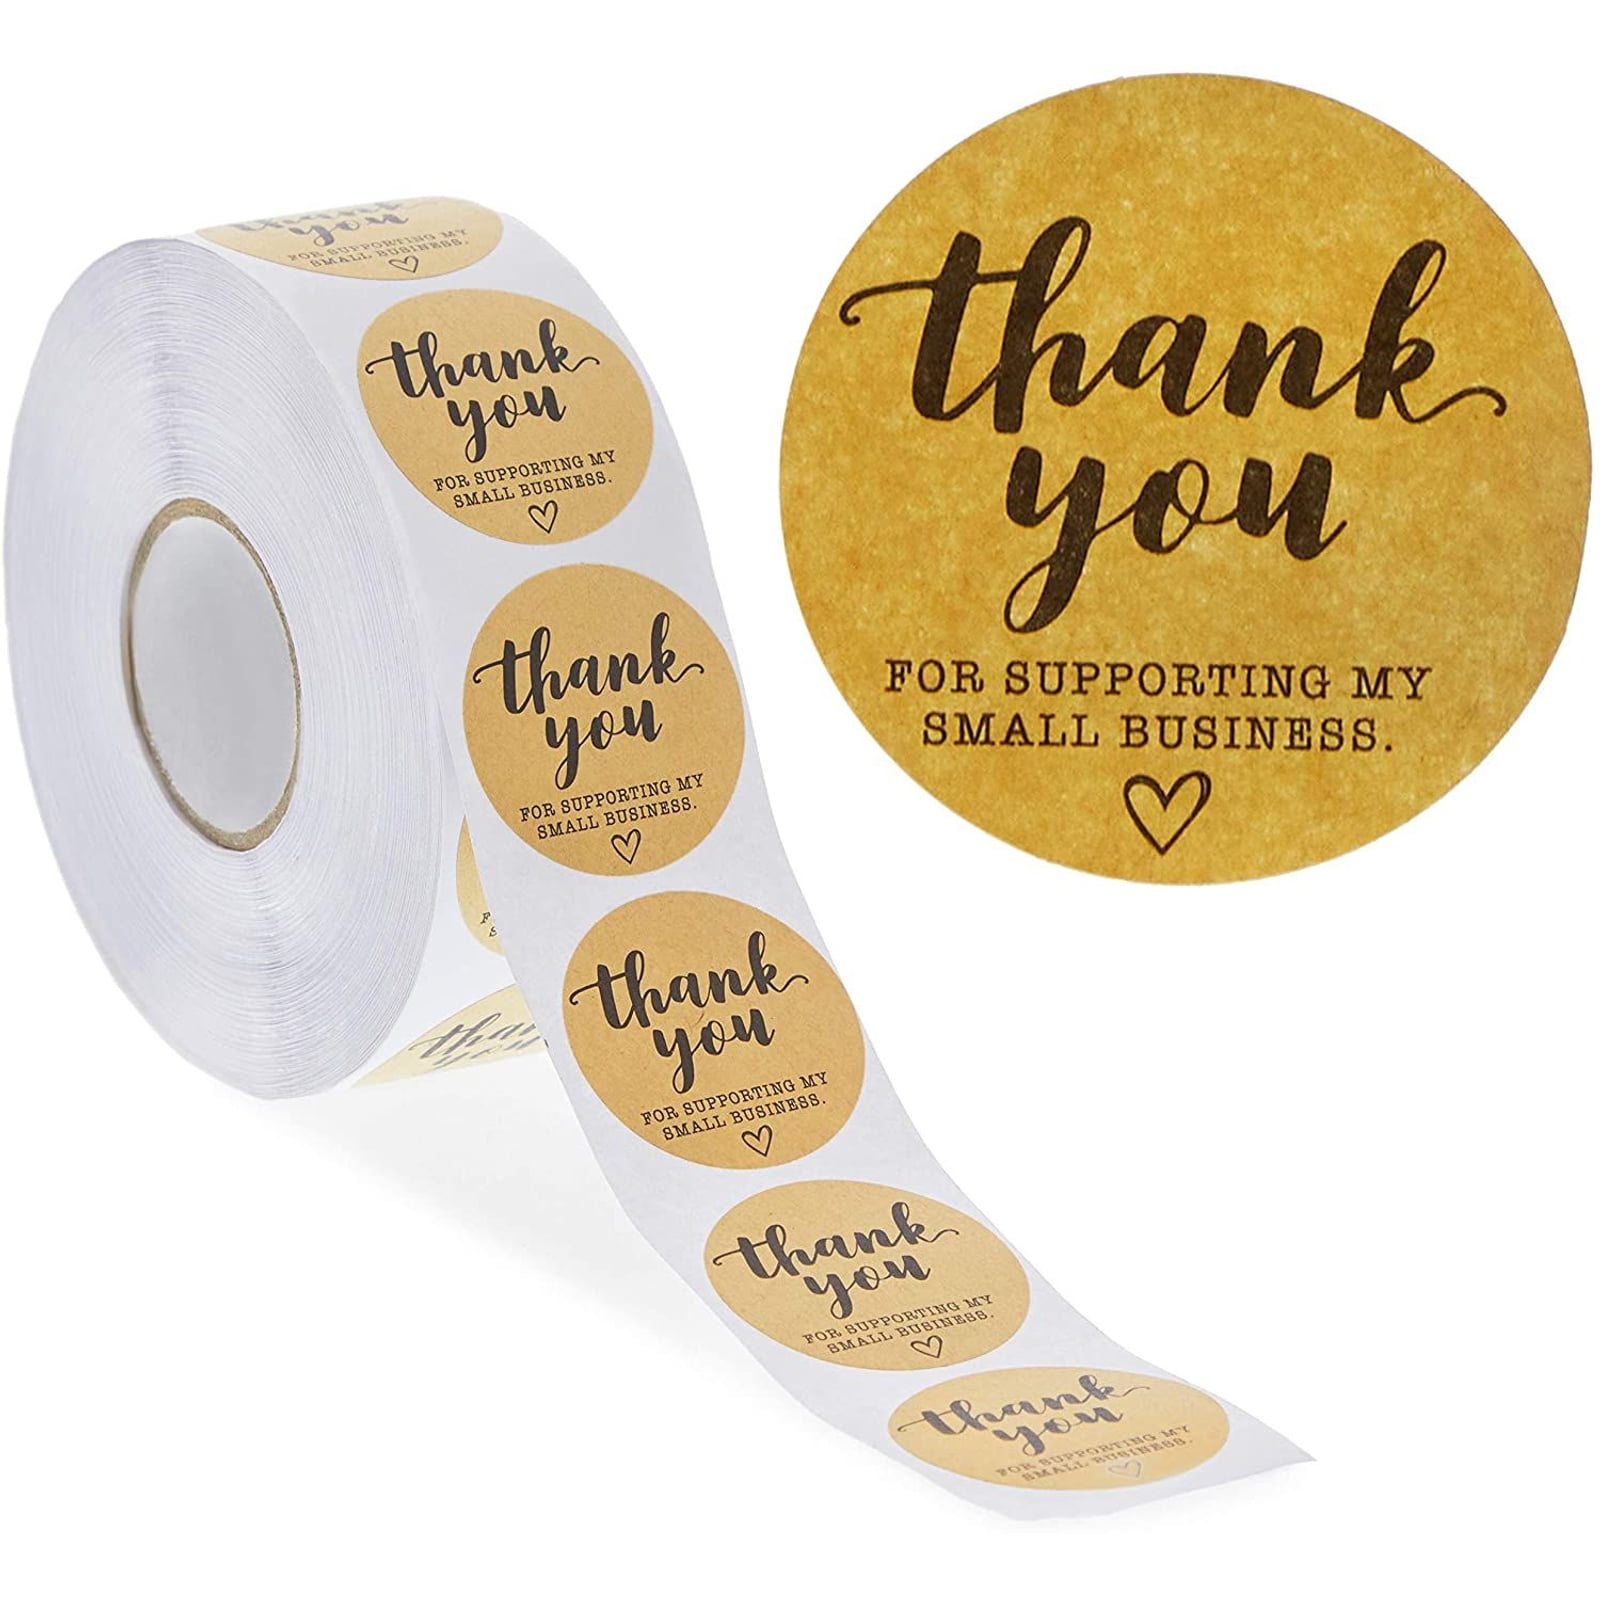 1 Inch Thank You Stickers 1000pcs,Kraft Sealing Stickers Thank You Labels,for Small Business,Party,Wedding,Decoration,Boutiques,Envelope and Stamp 